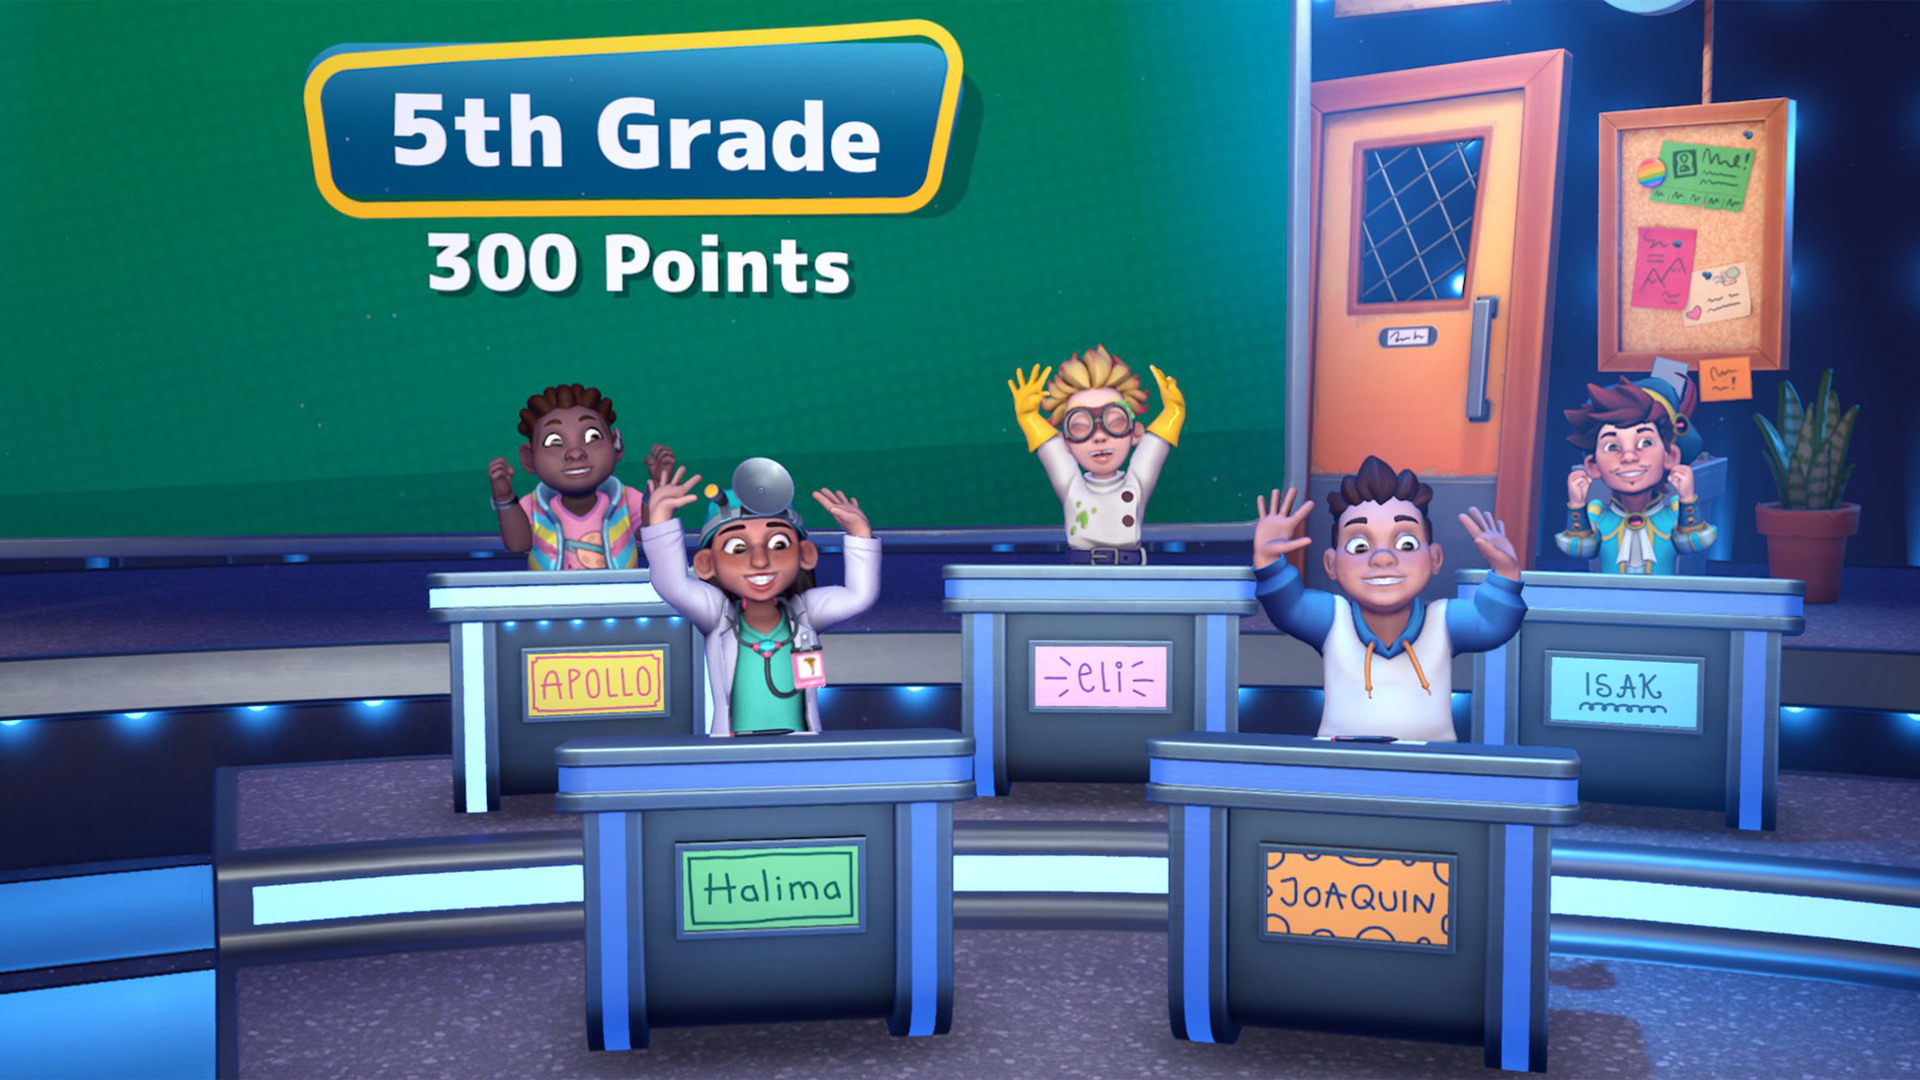 Are You Smarter Than A 5th Grader? - screenshot 6